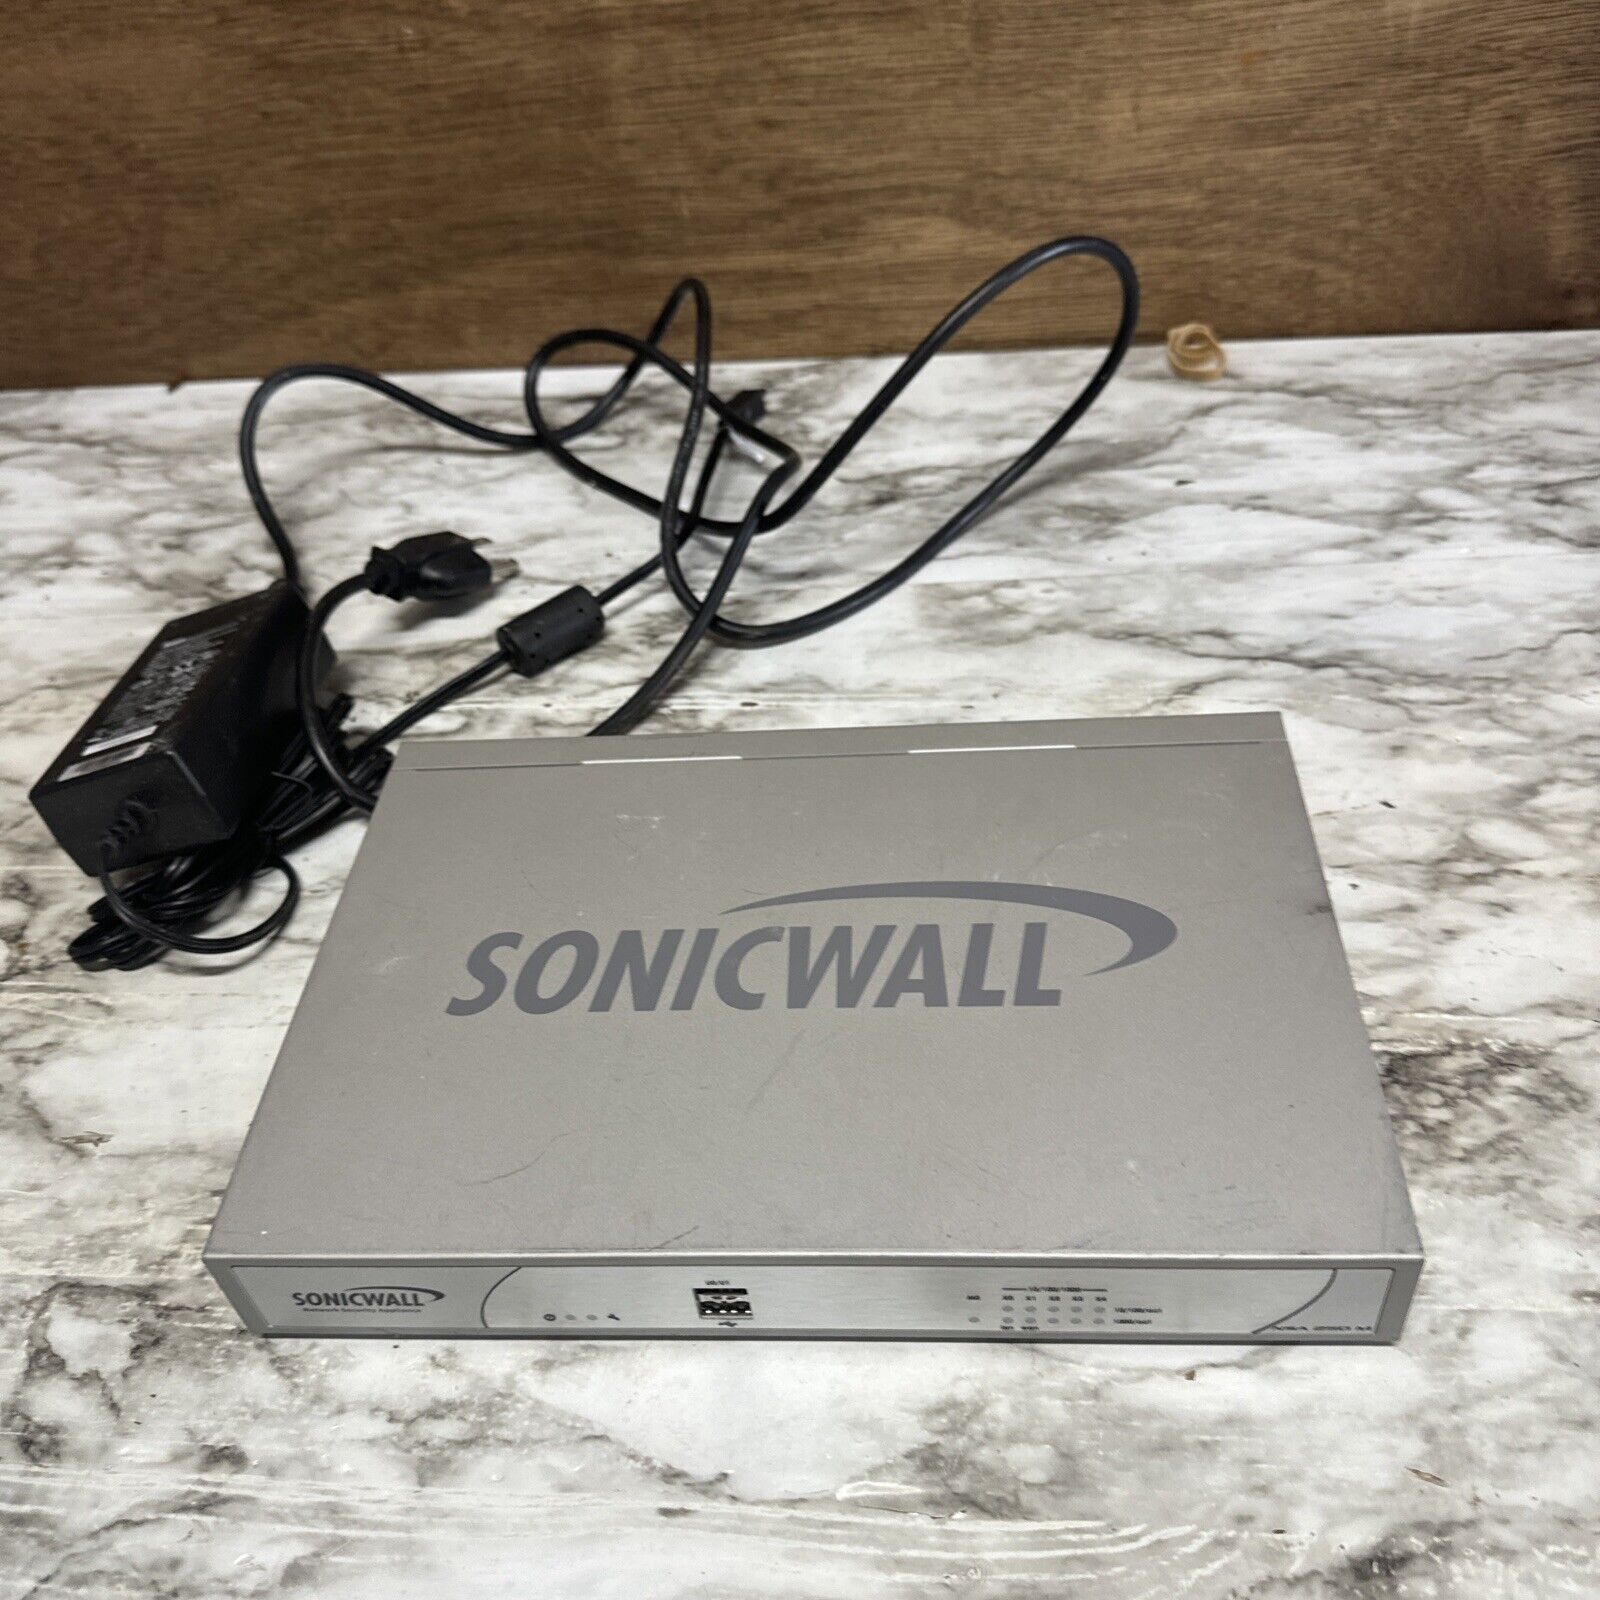 SonicWALL NSA 250M Used And Tested